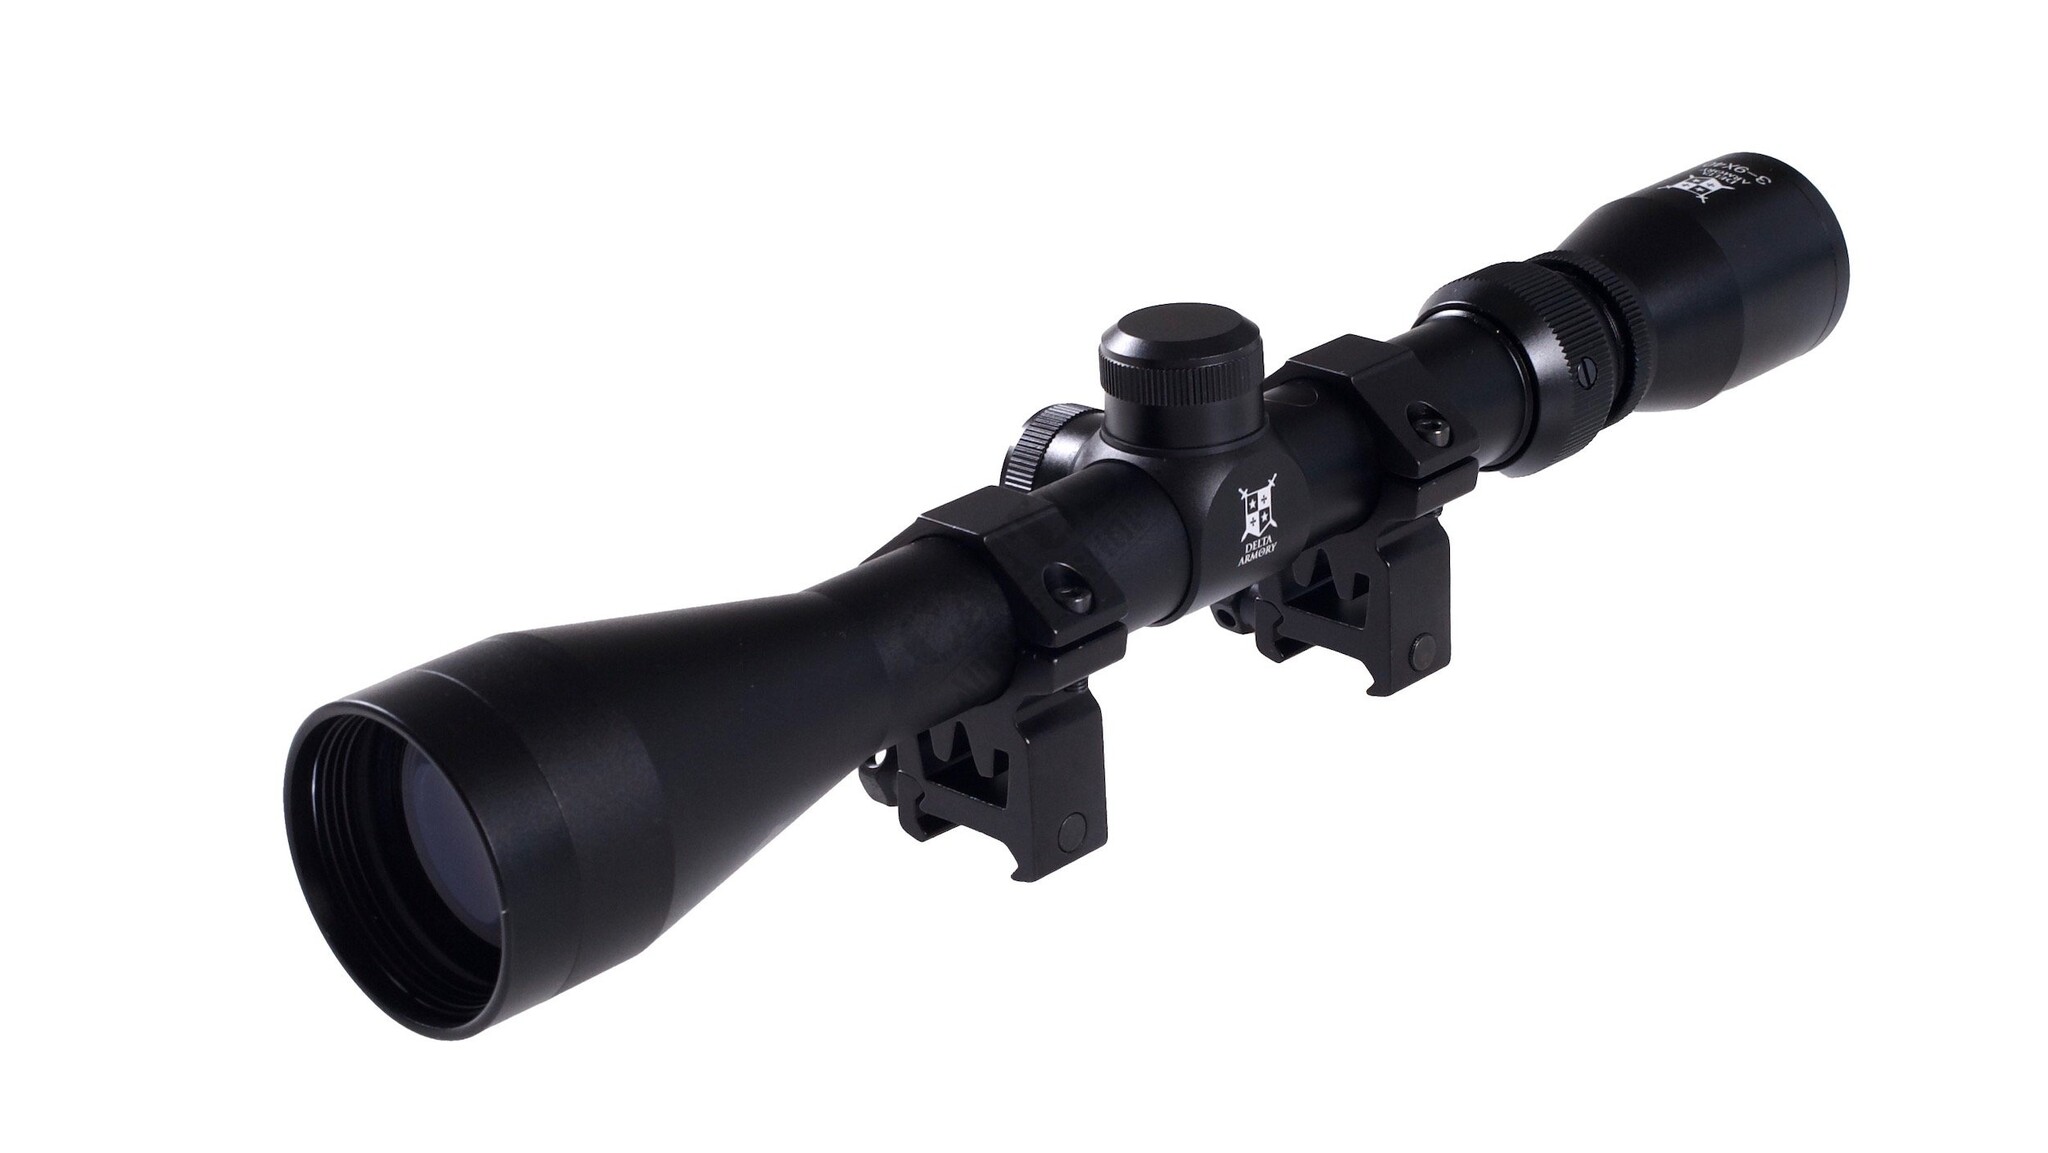 Delta Armory 3-9x40 rifle scope with 22 mm mounting rings - BK